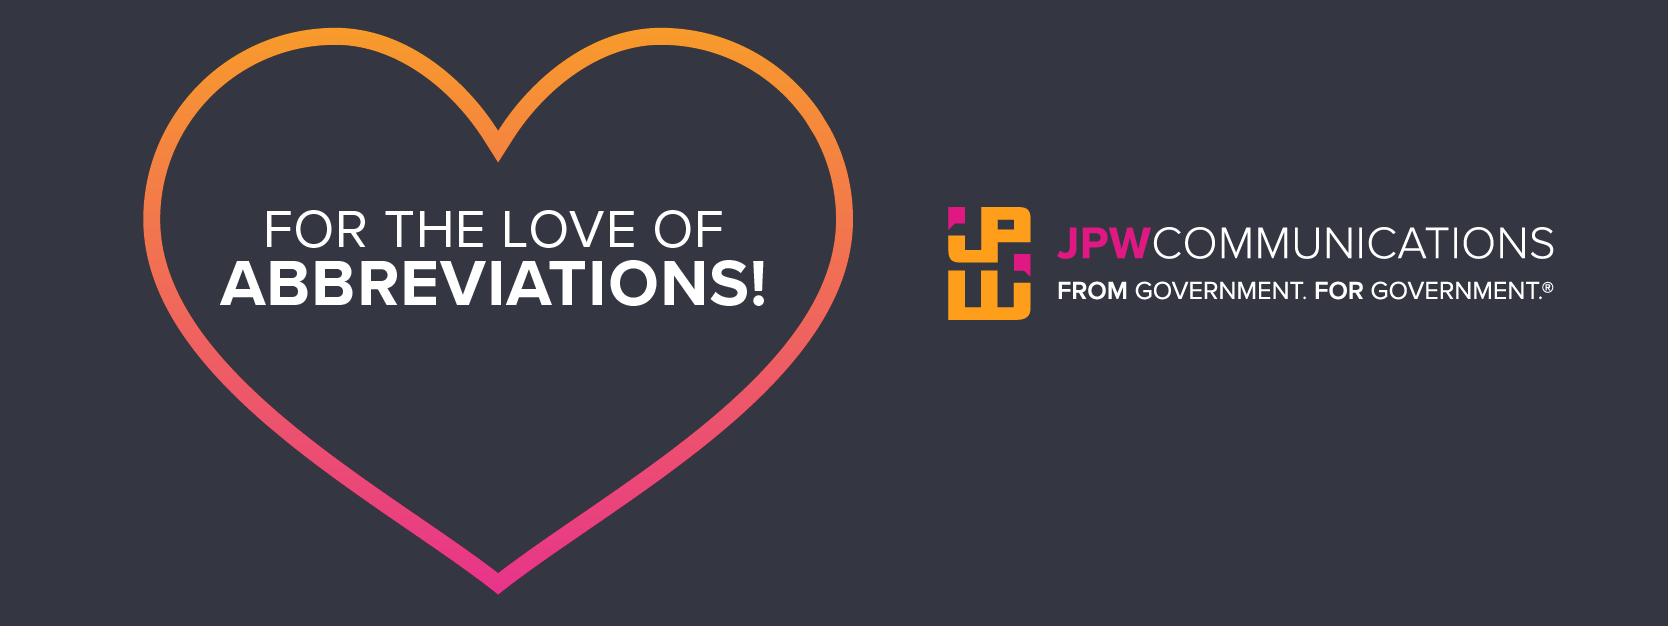 For the love of abbreviation in a heart outline with JPW Communications logo to the right.